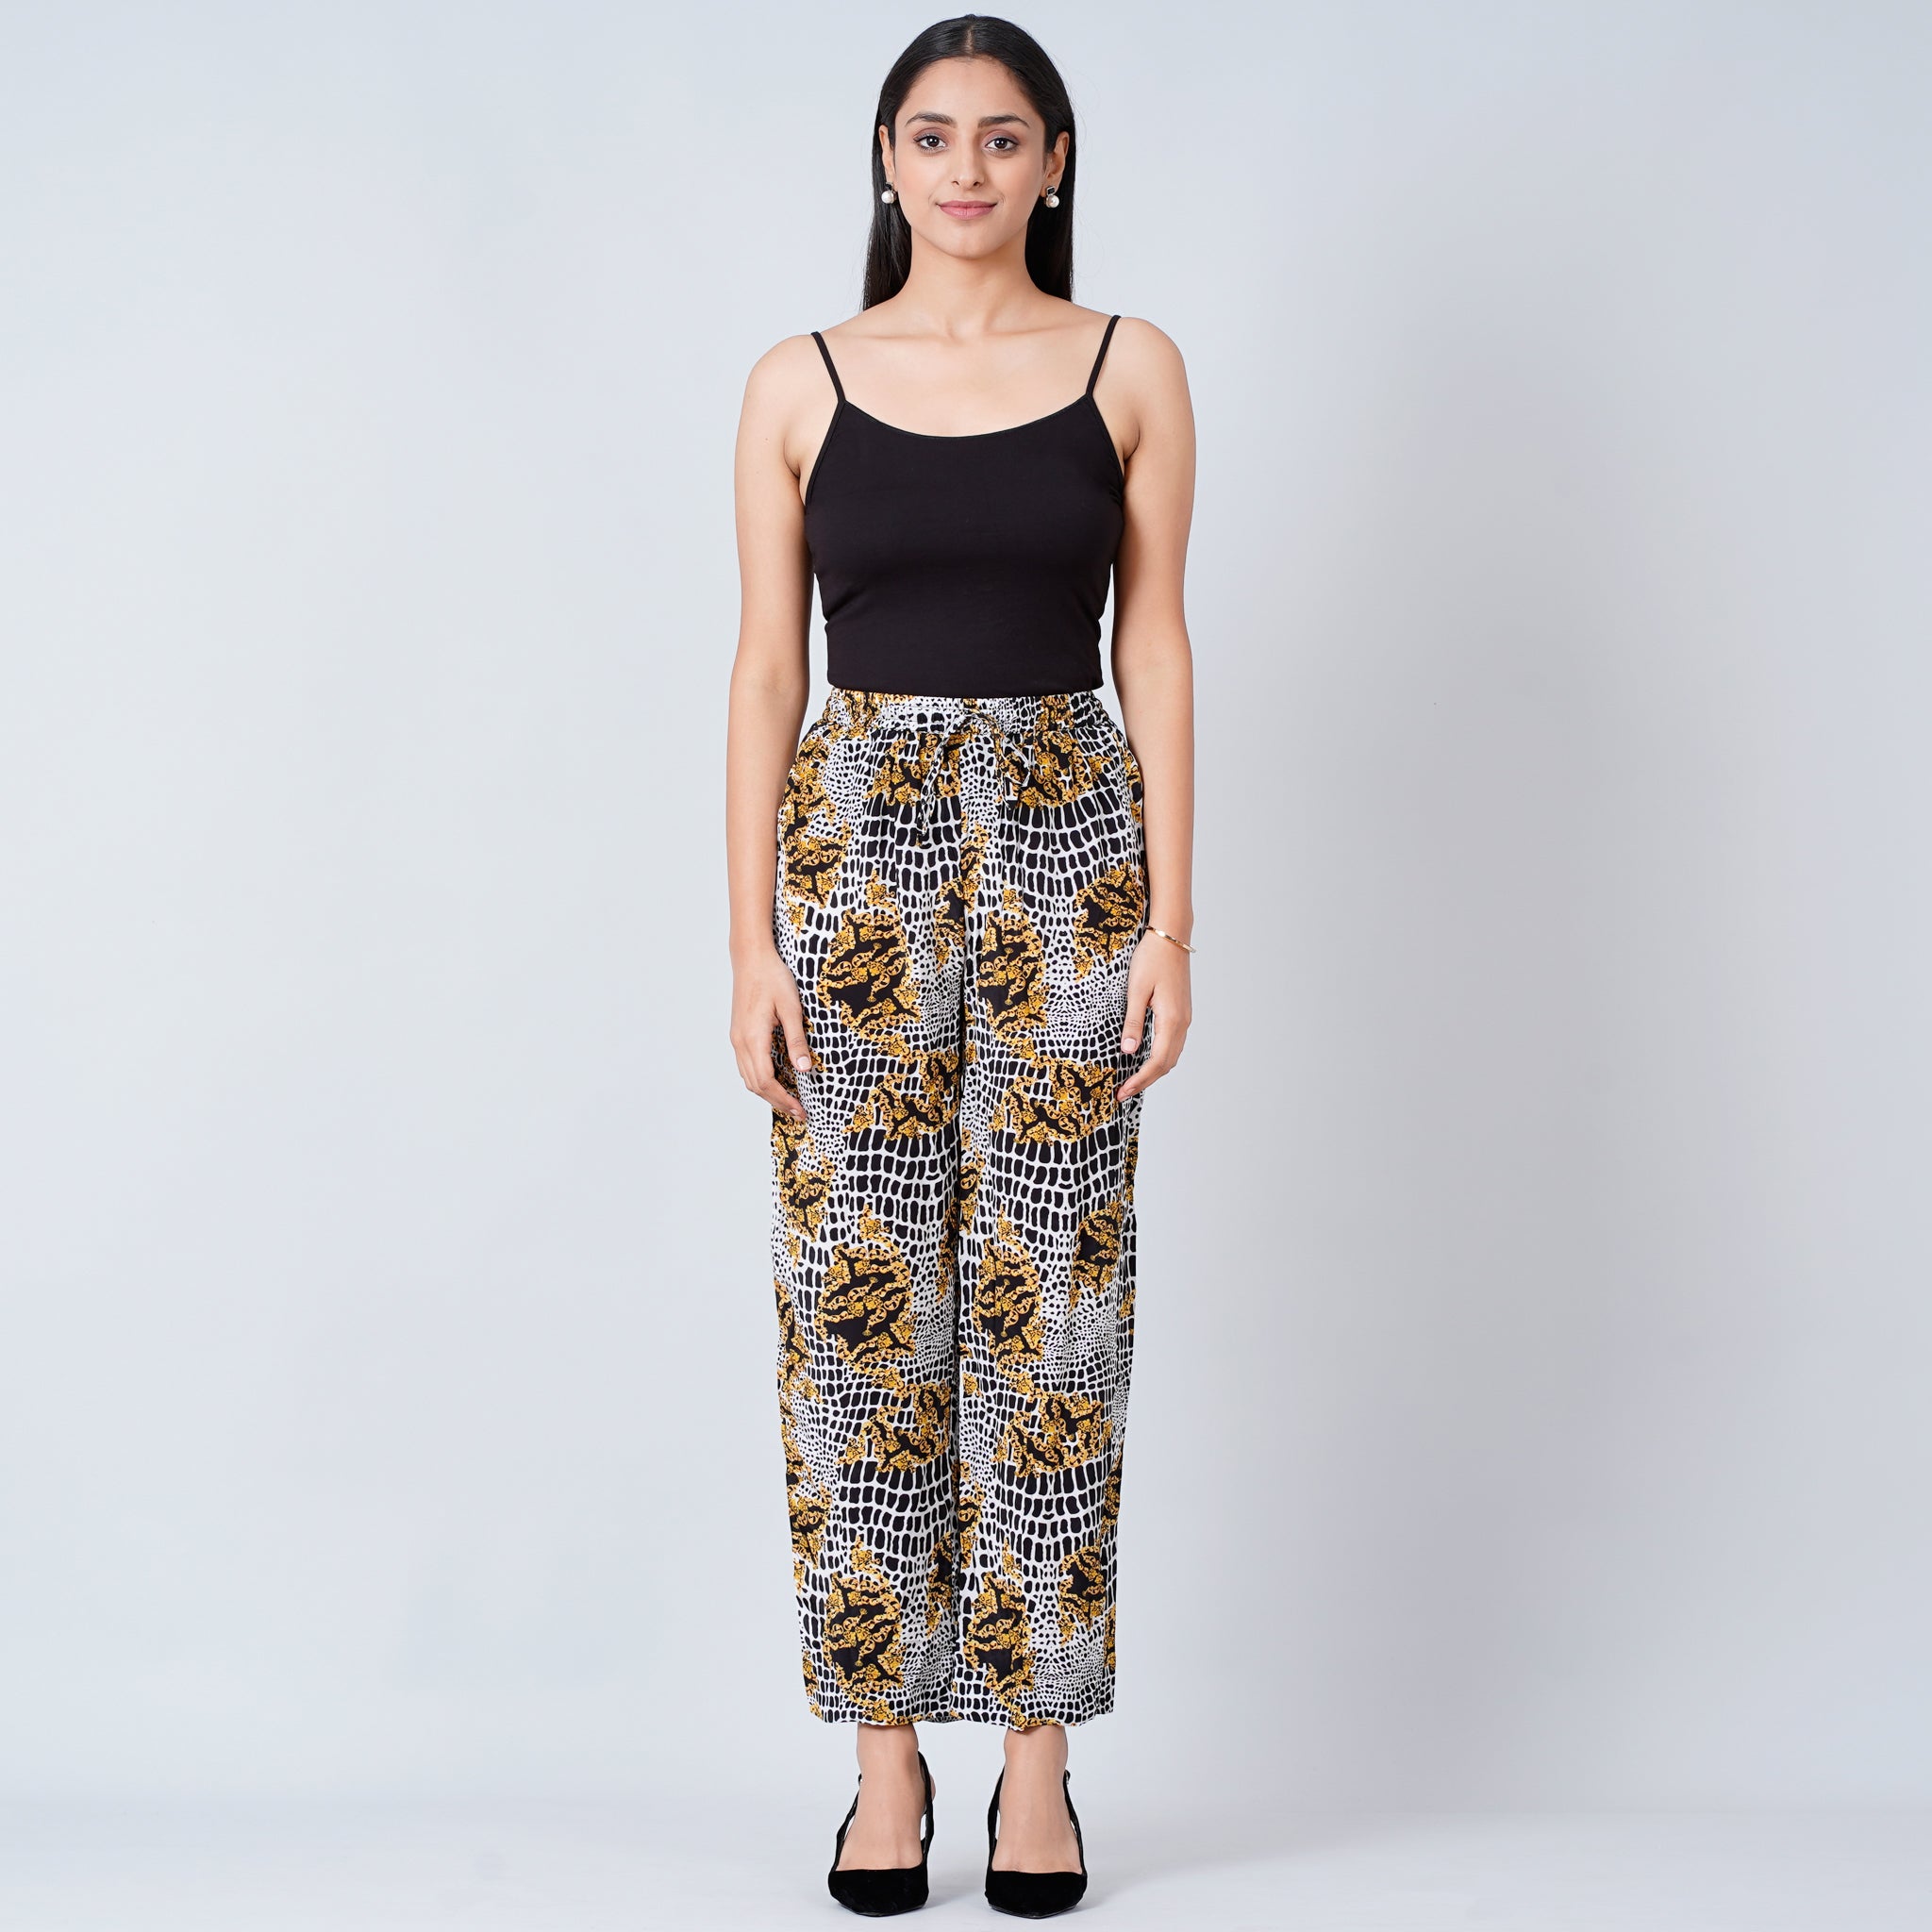 Buy Rosatro Women Trouser Regular fit,Ladies Women Leopard Print High Waist Wide  Leg Trousers Casual Pants for Summer Formal/Casual Wear at Amazon.in